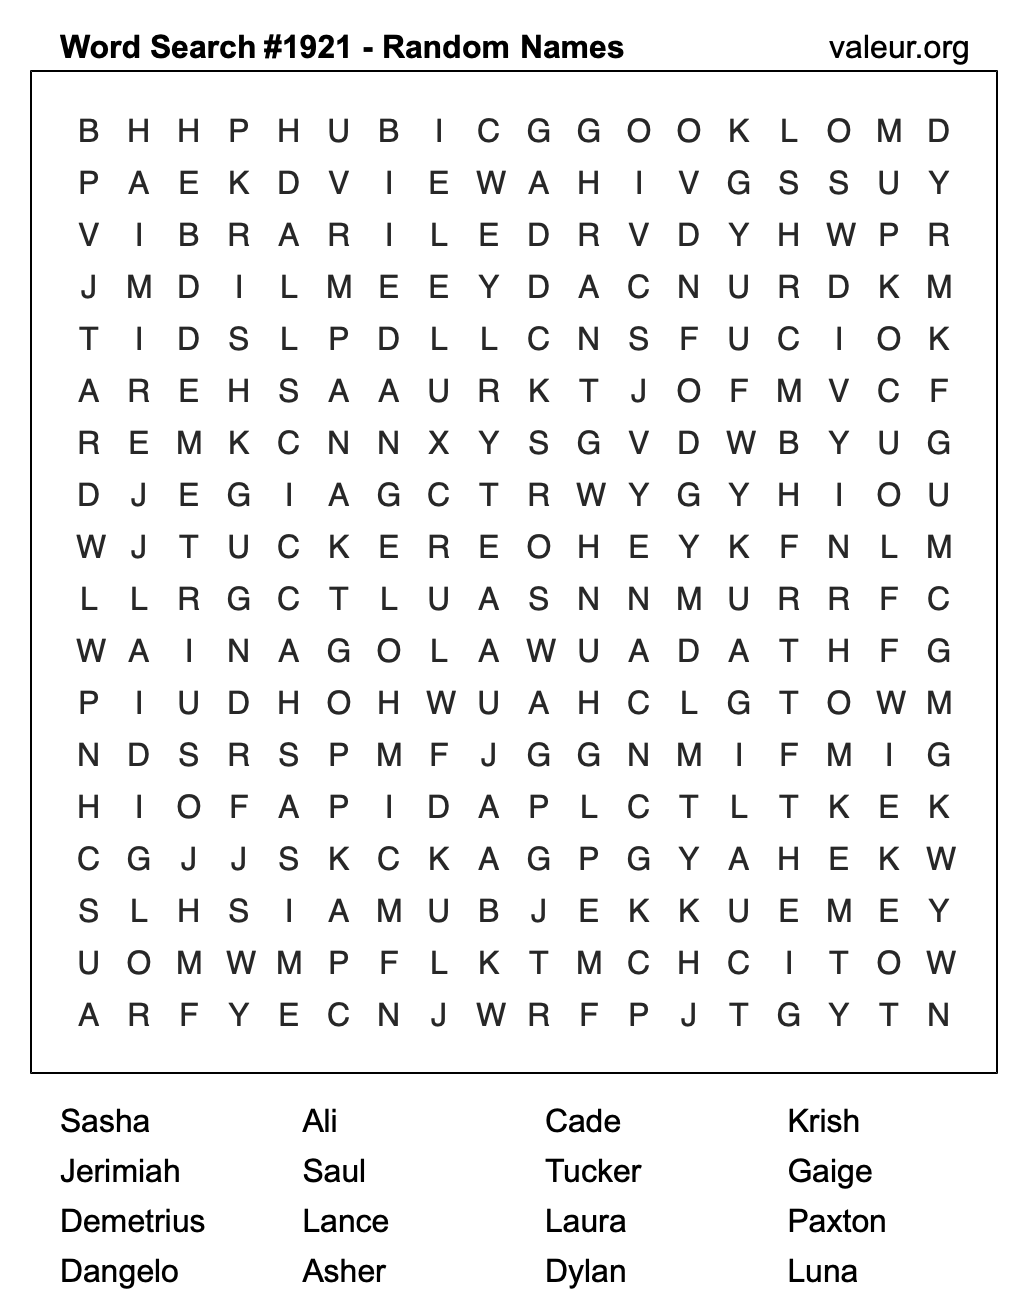 Word Search Puzzle with names #1921